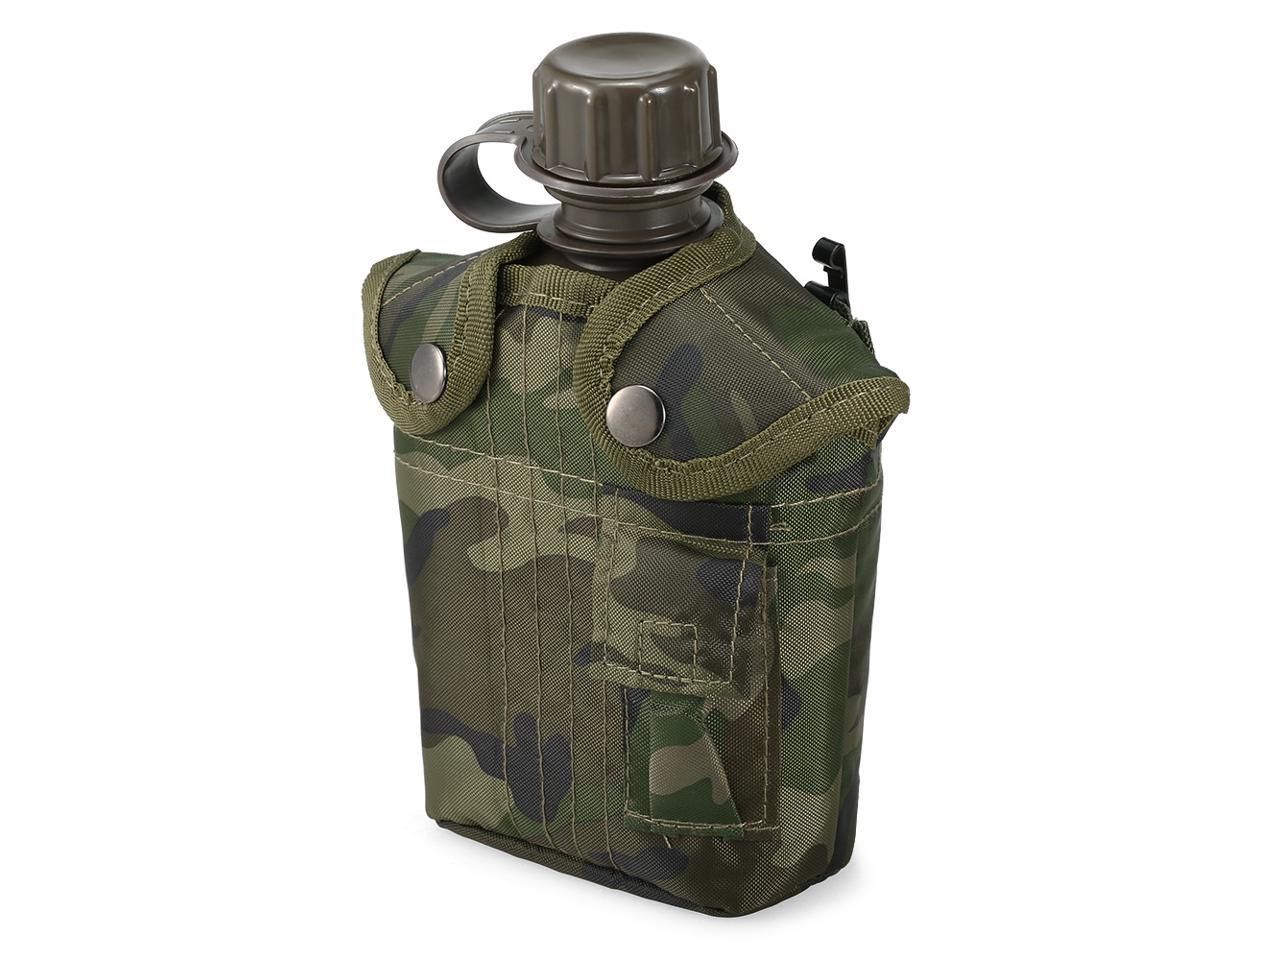 Details about   Canteen Bottle Military Water Flask Camping Survival Kettle Pouch Backpacking